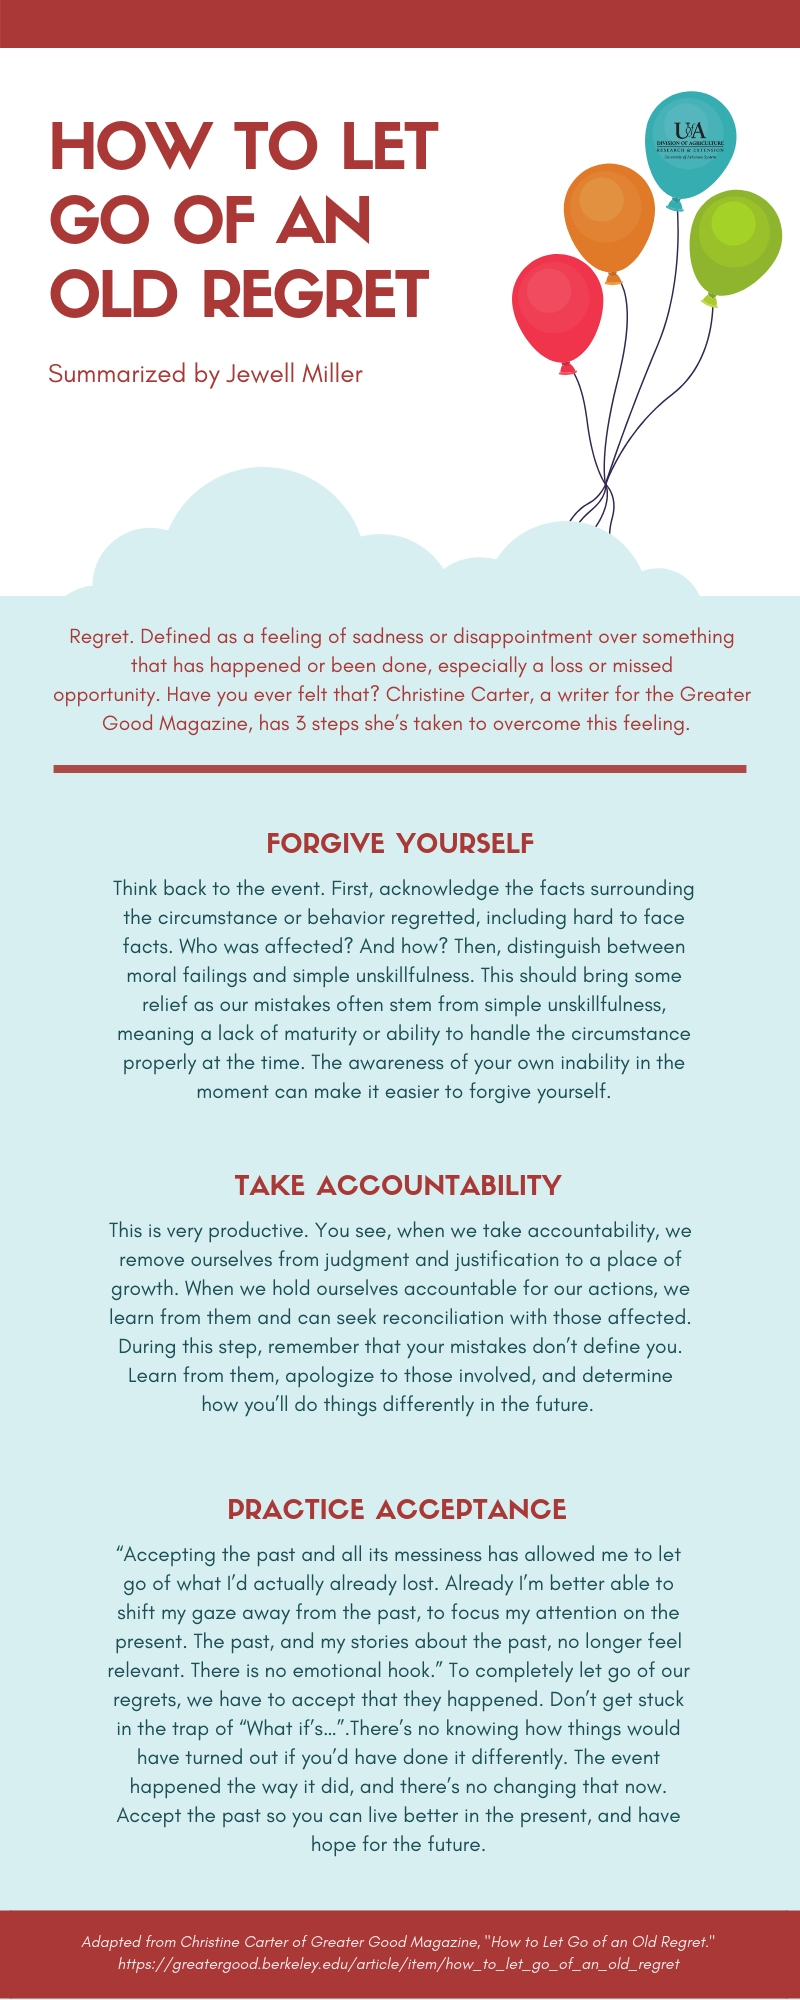 How to Let Go of an Old Regret Infographic